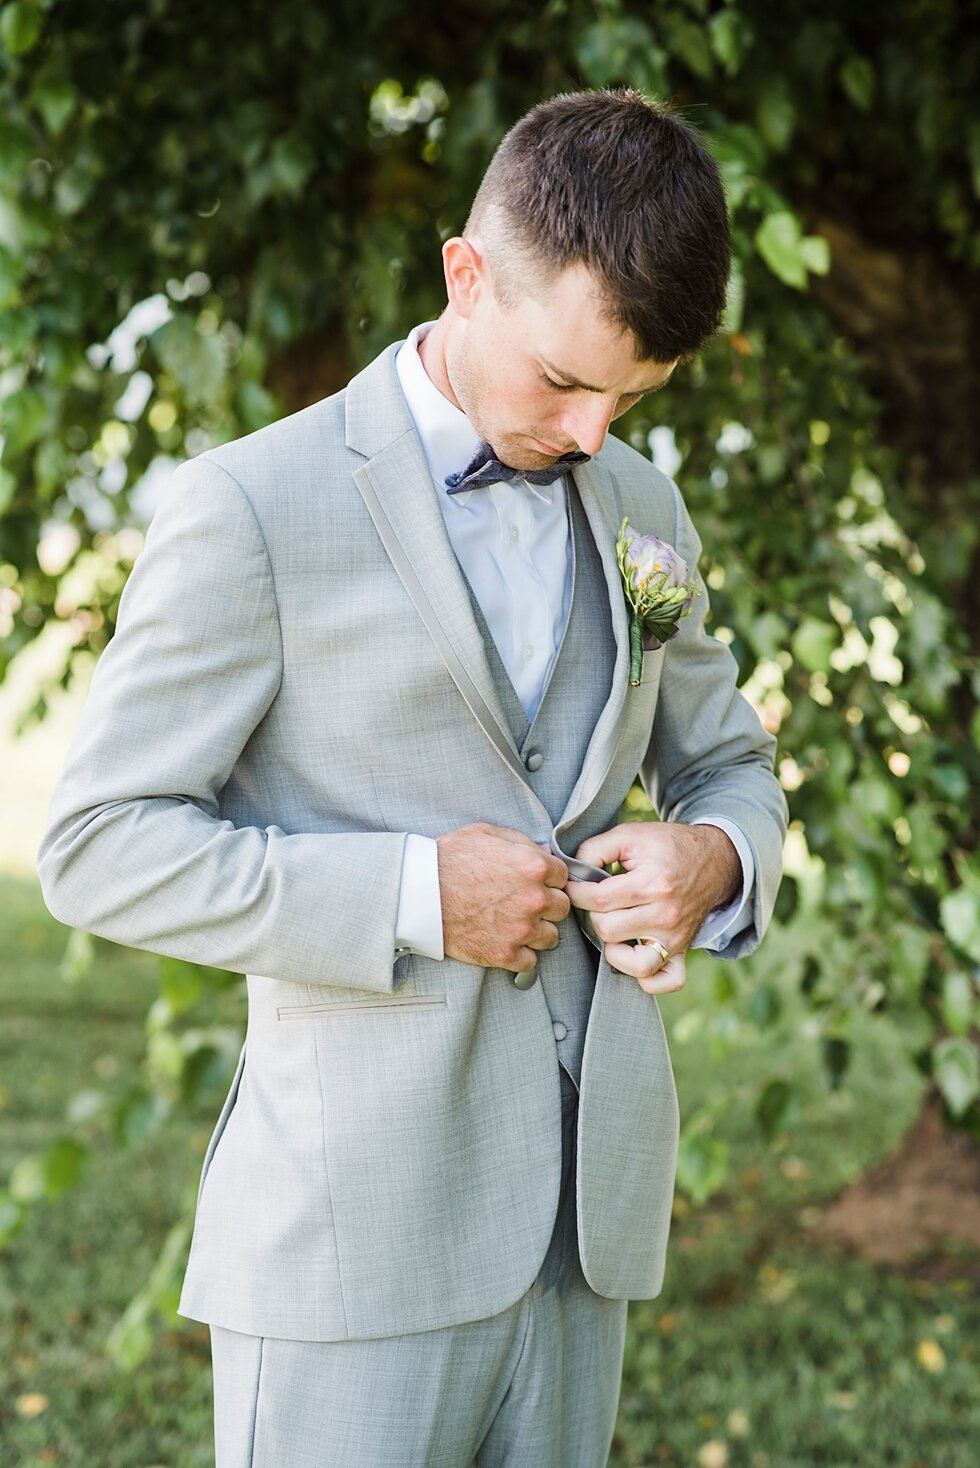  Groom adjusting jacket on his wedding day with greenery in the background as he awaits the arrival of his stunning bride and soon to be wife. #thatsdarling #weddingday #weddinginspiration #weddingphoto #love #justmarried #midwestphotographer #kywedd